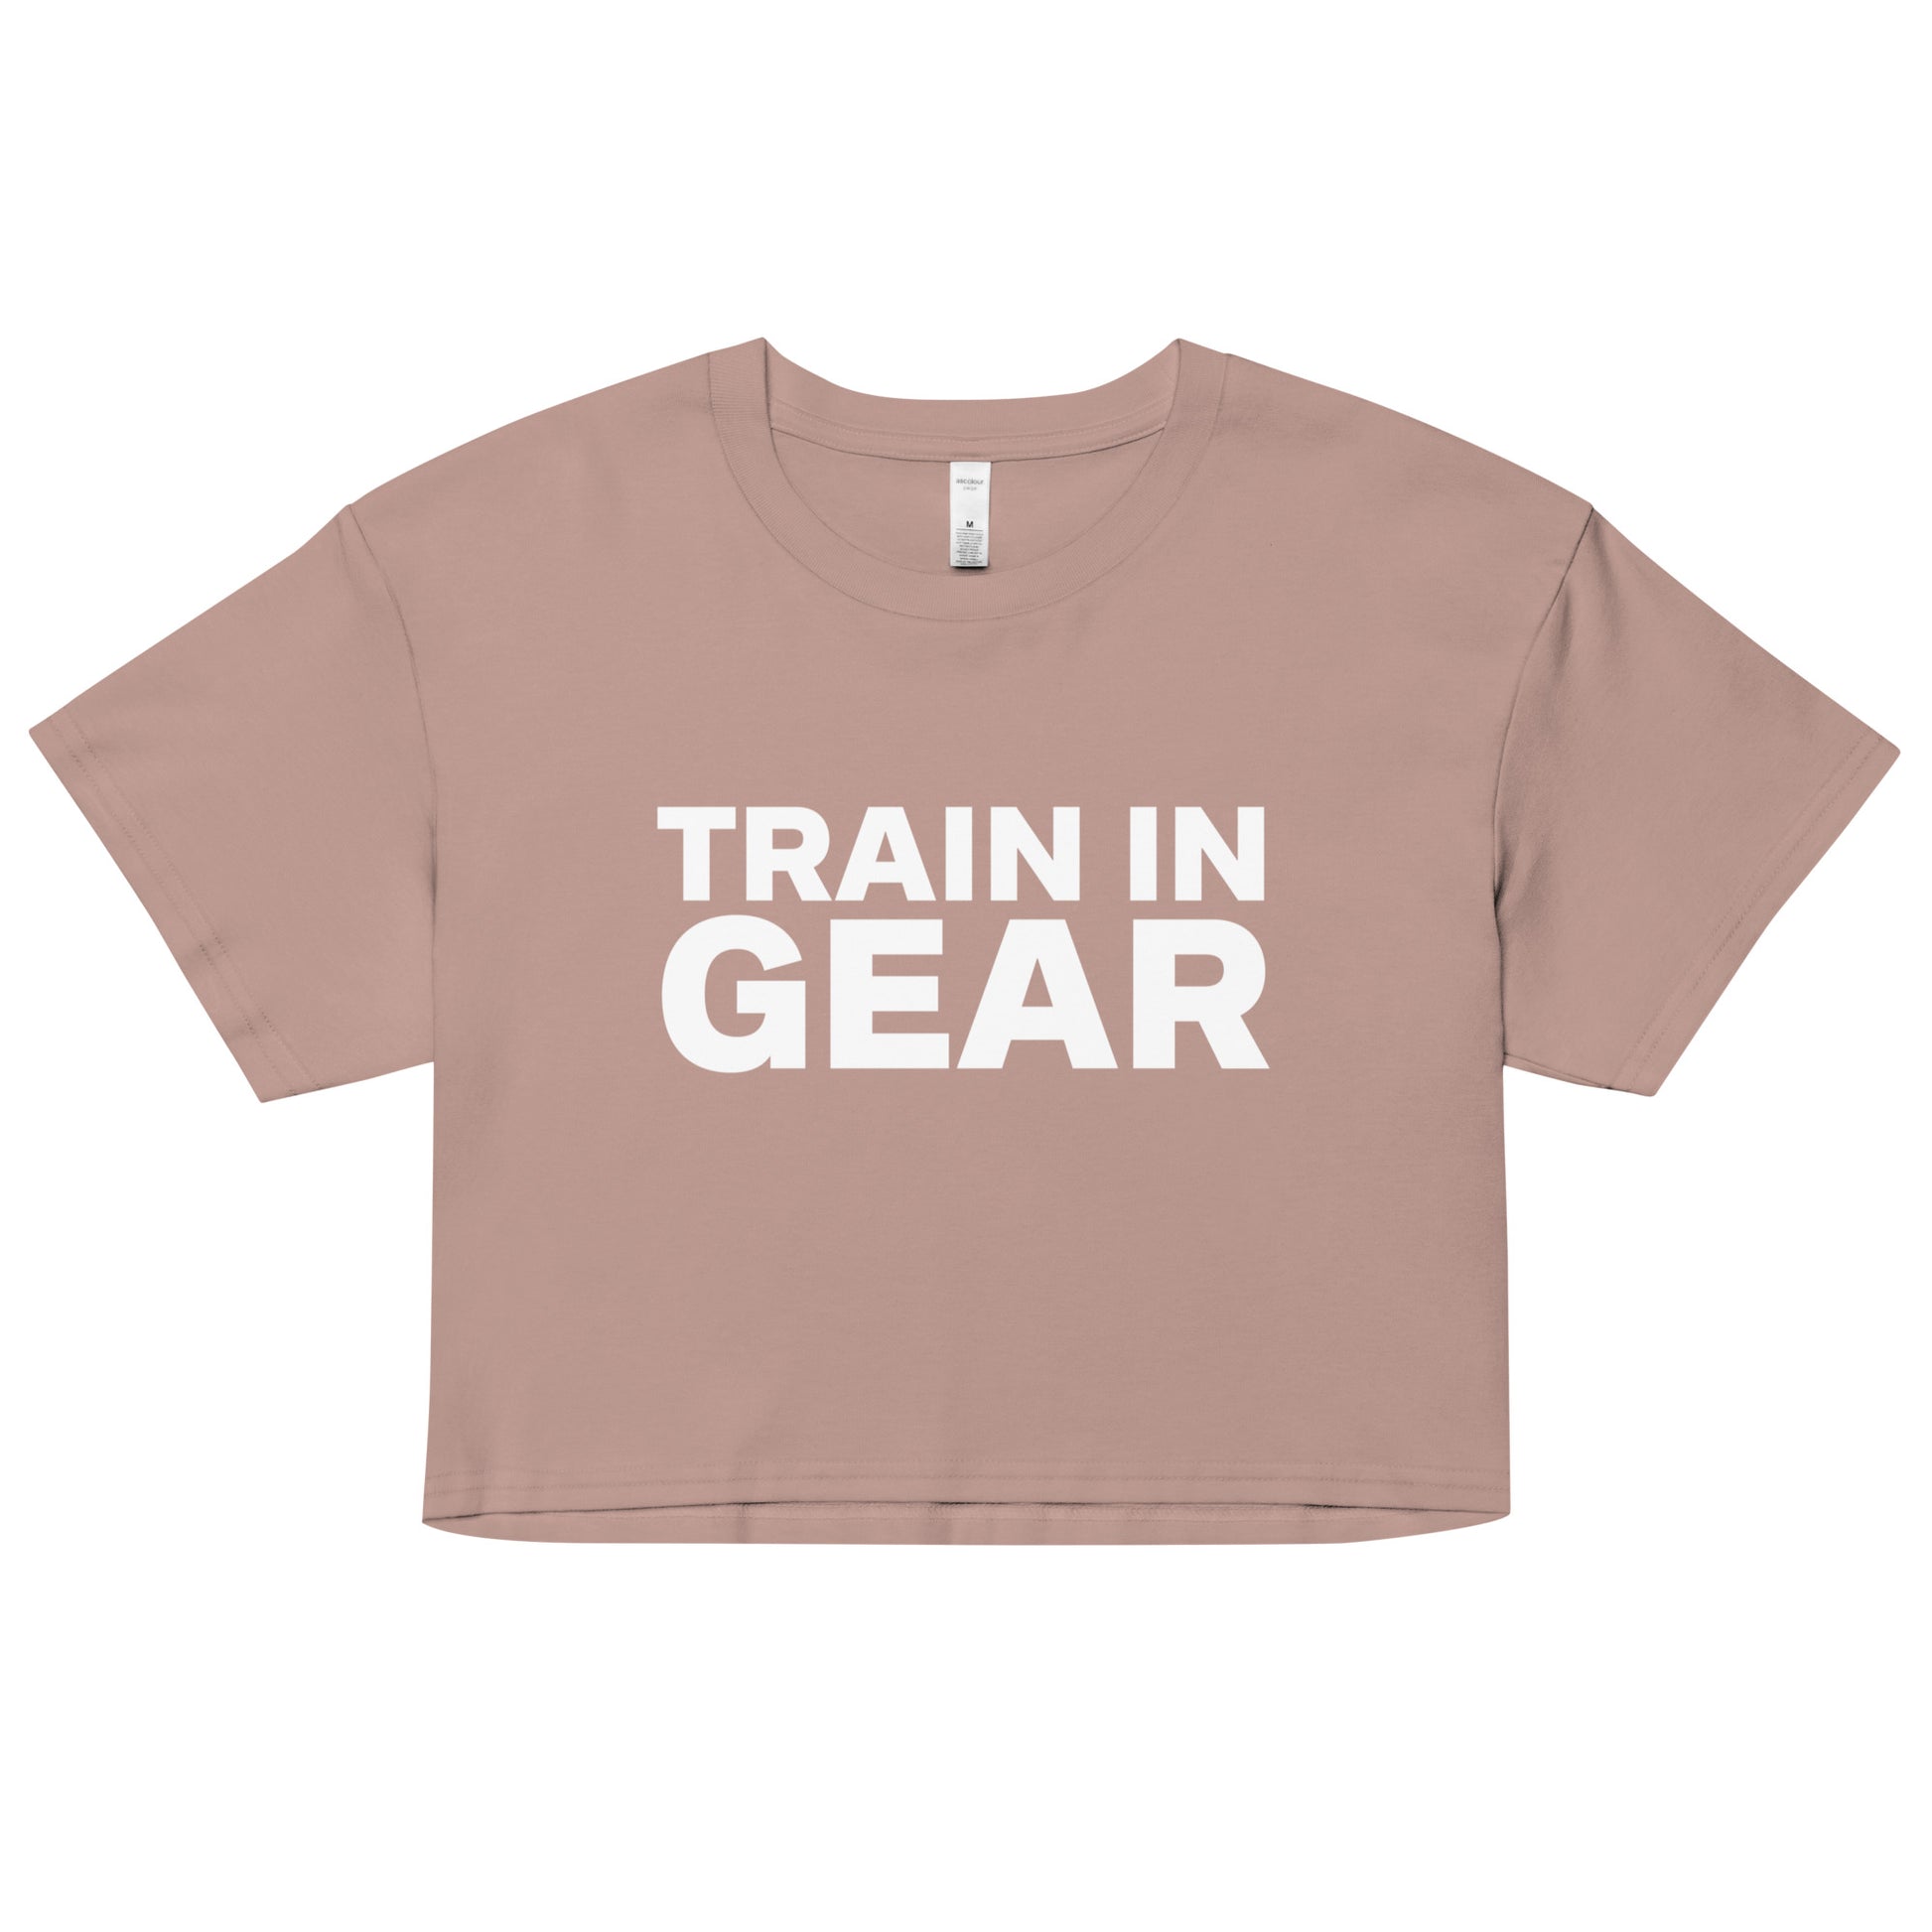 Train in Gear Women's firefighter and military crop top. Hazy Pink and white.